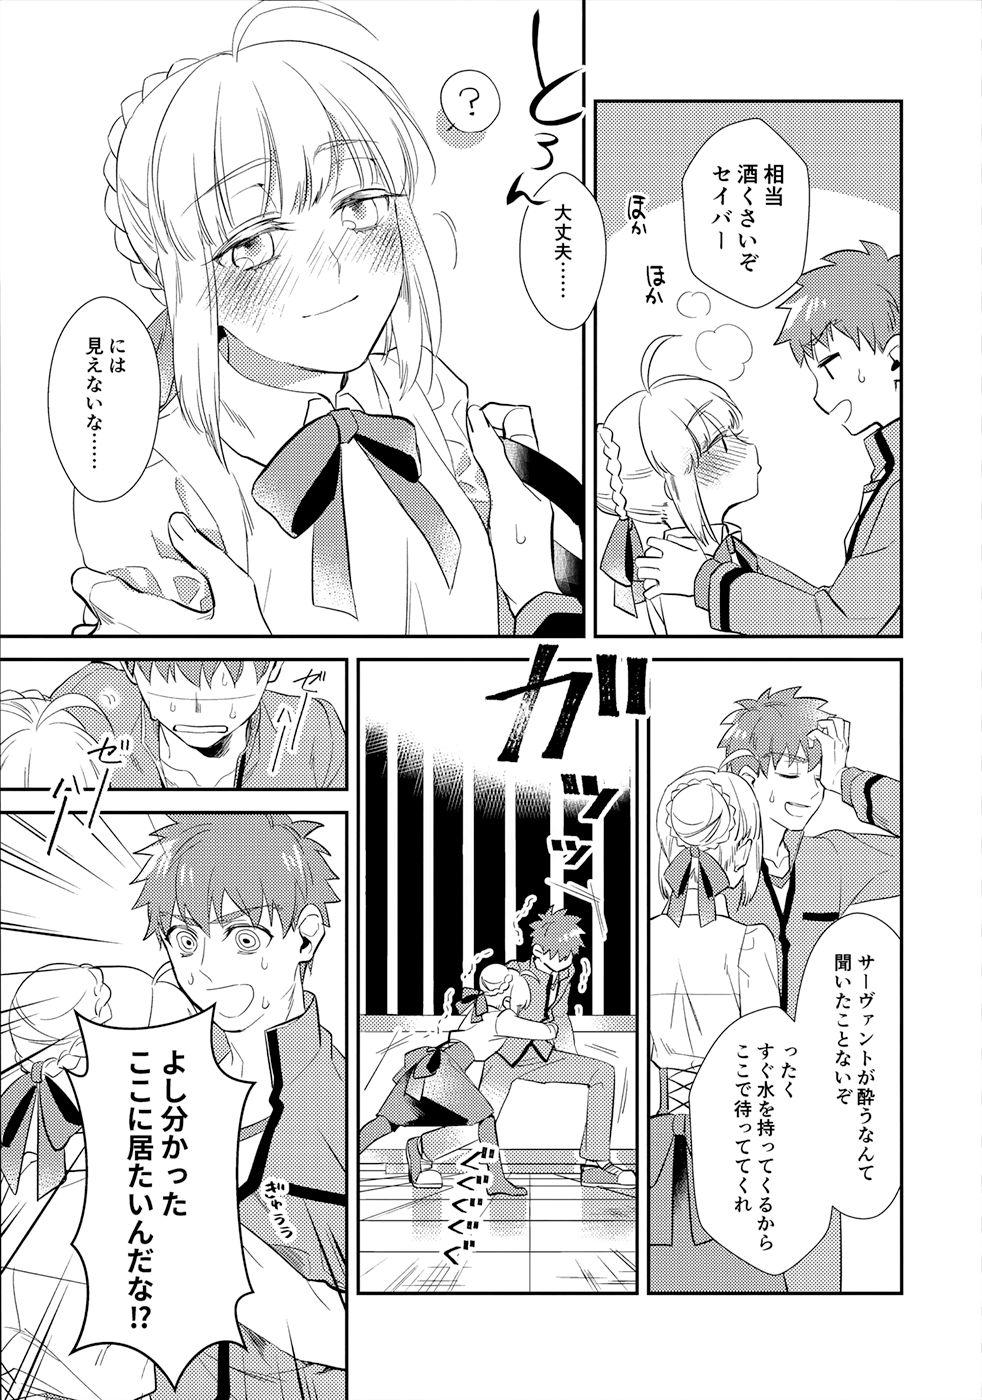 Hogtied Nonde Nomarete - Fate stay night Stepbro - Page 6